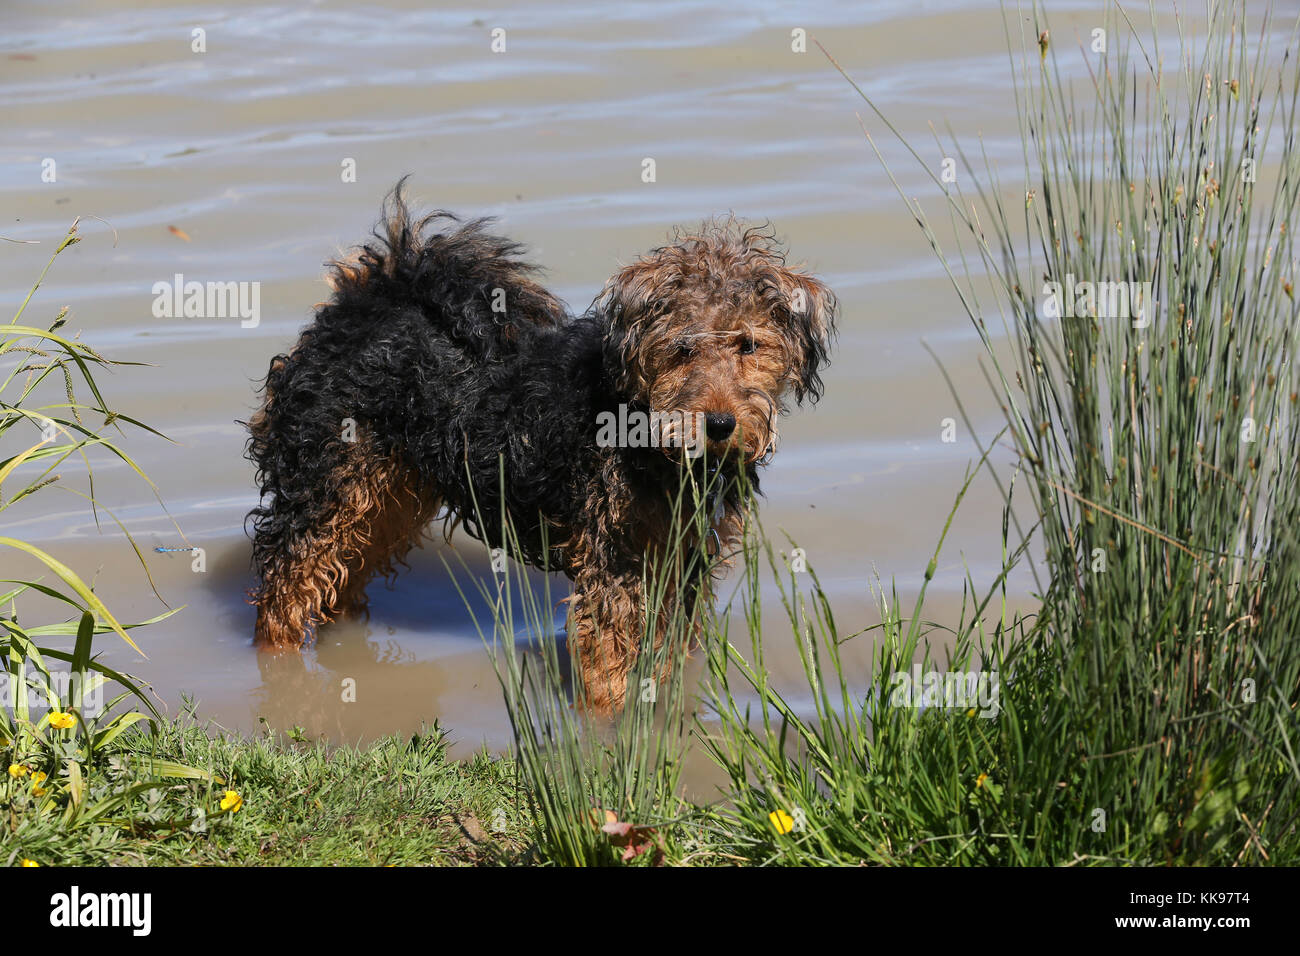 Welsh Terrier 8 month old dog standing in shallow water beside reeds on bank Stock Photo